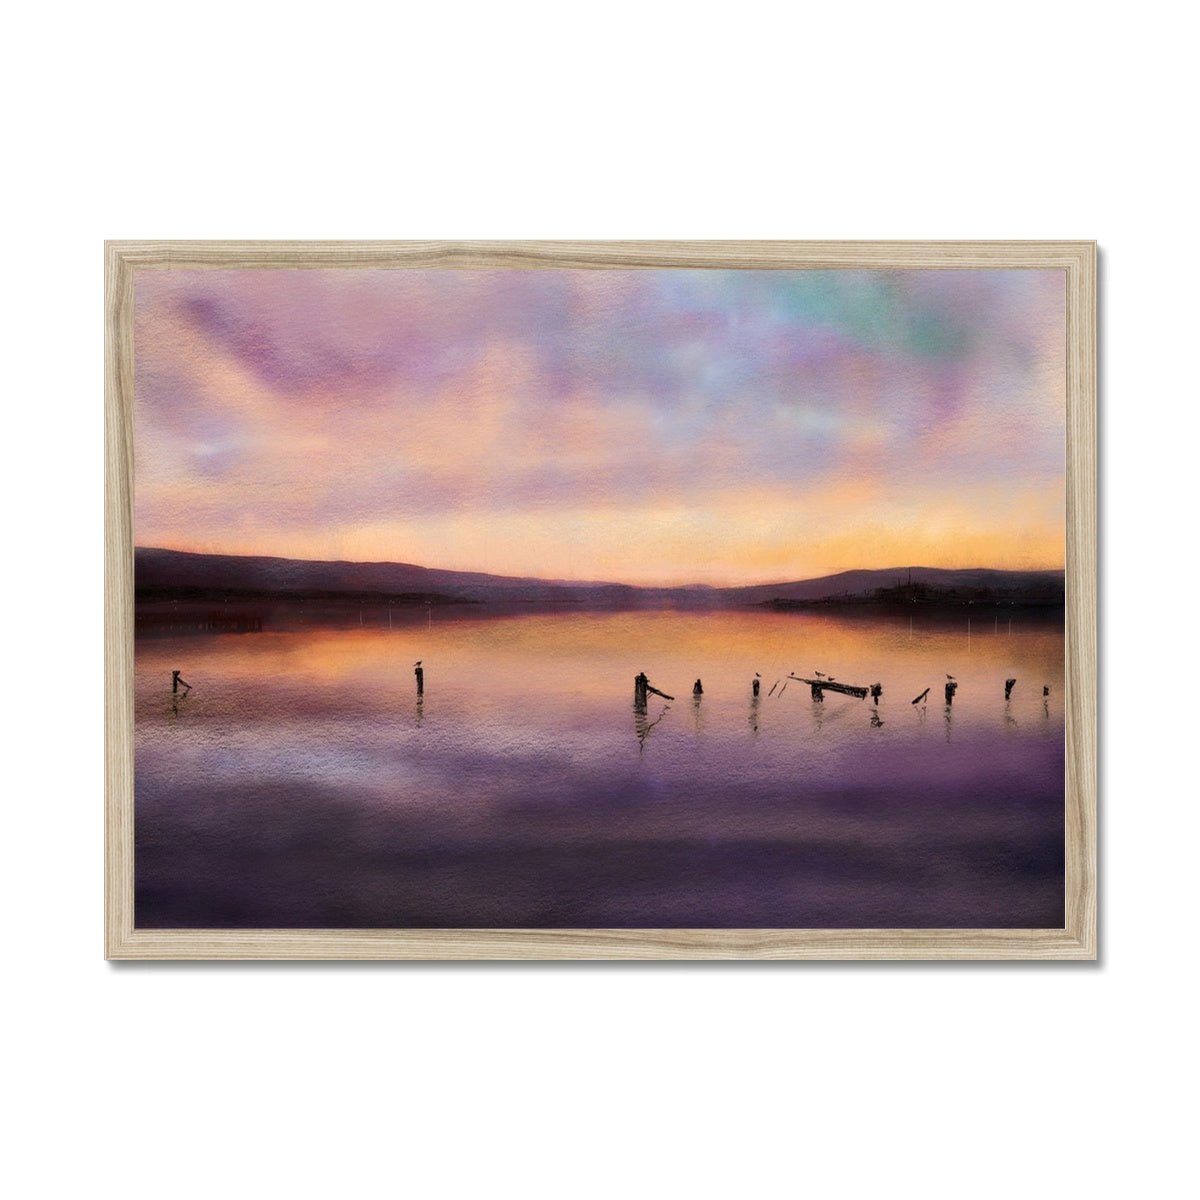 Admiralty Jetty Dusk Painting | Framed Prints From Scotland-Framed Prints-River Clyde Art Gallery-A2 Landscape-Natural Frame-Paintings, Prints, Homeware, Art Gifts From Scotland By Scottish Artist Kevin Hunter